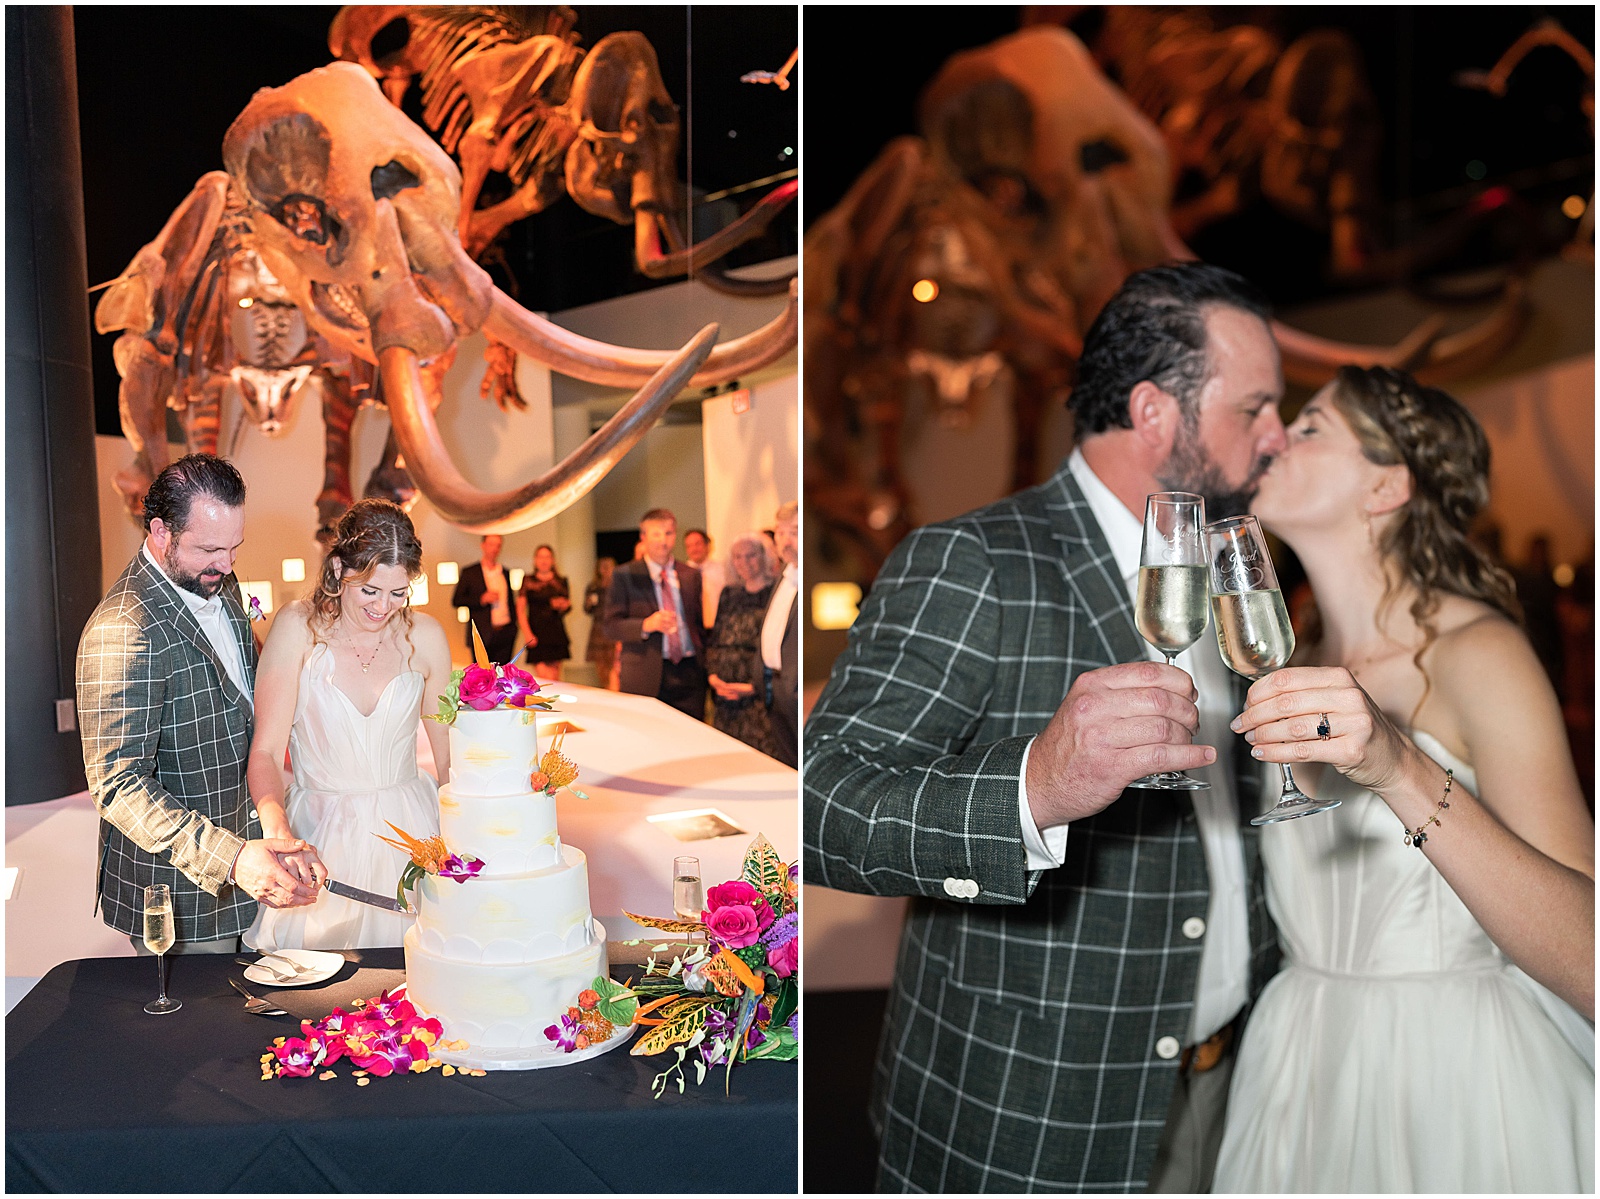 Wedding Cake Cutting with Dinosaurs at Houston Museum of Natural Science Wedding Reception | Swish and Click Photography